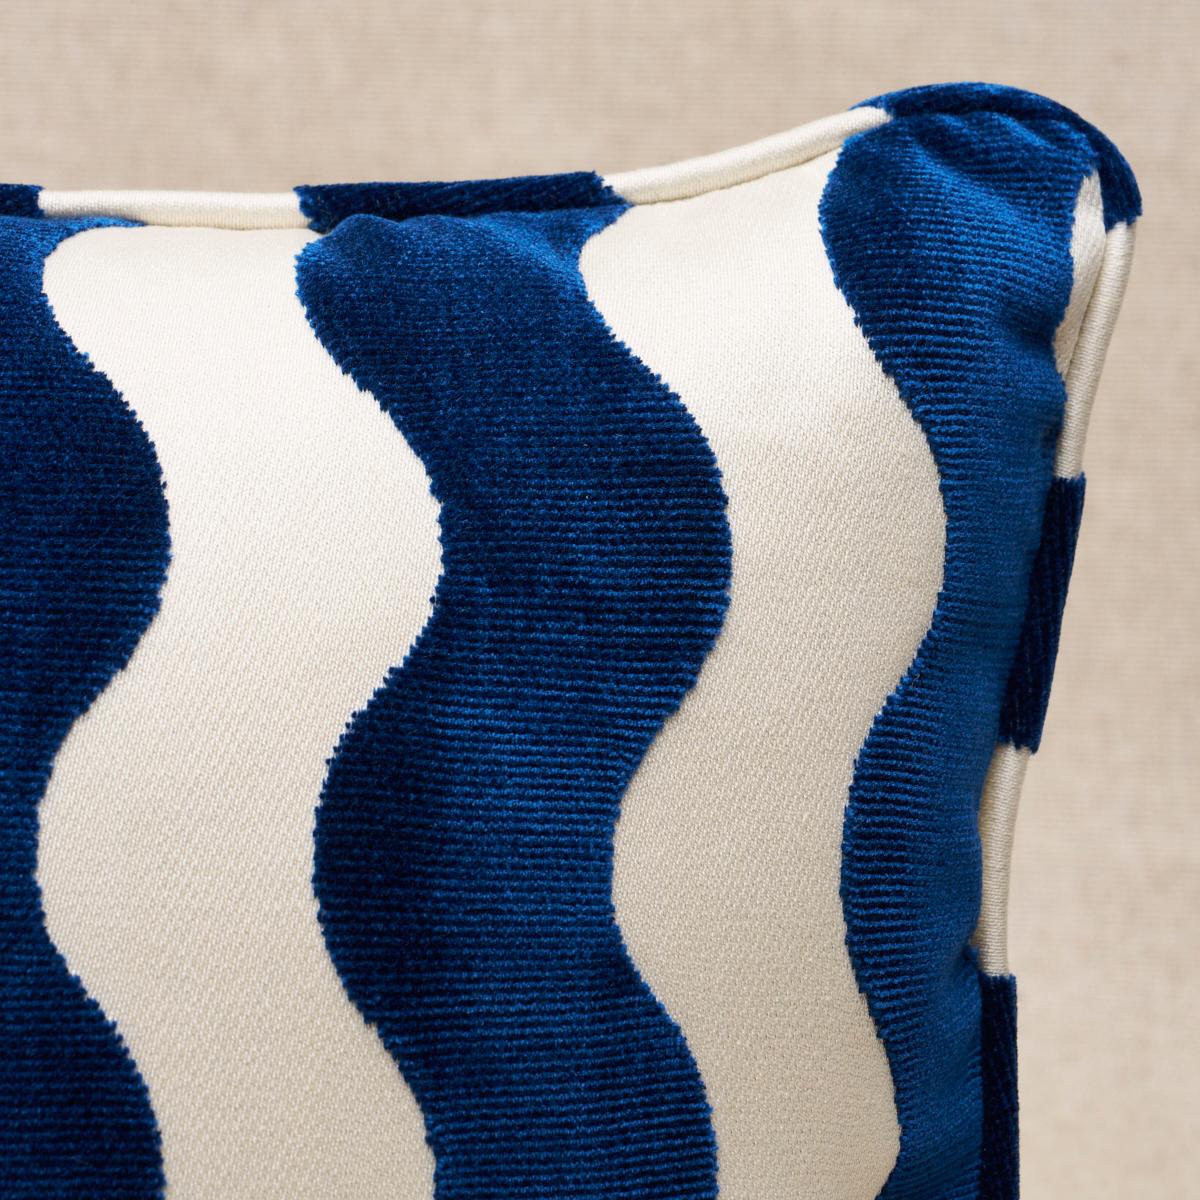 This pillow features The Wave by Miles Reddwith a self-welt finish. A chic, graphic cut velvet inspired by 1970s Pierre Cardin and Yves Saint Laurent designs. Pillow includes a feather/down fill insert and hidden zipper closure.
